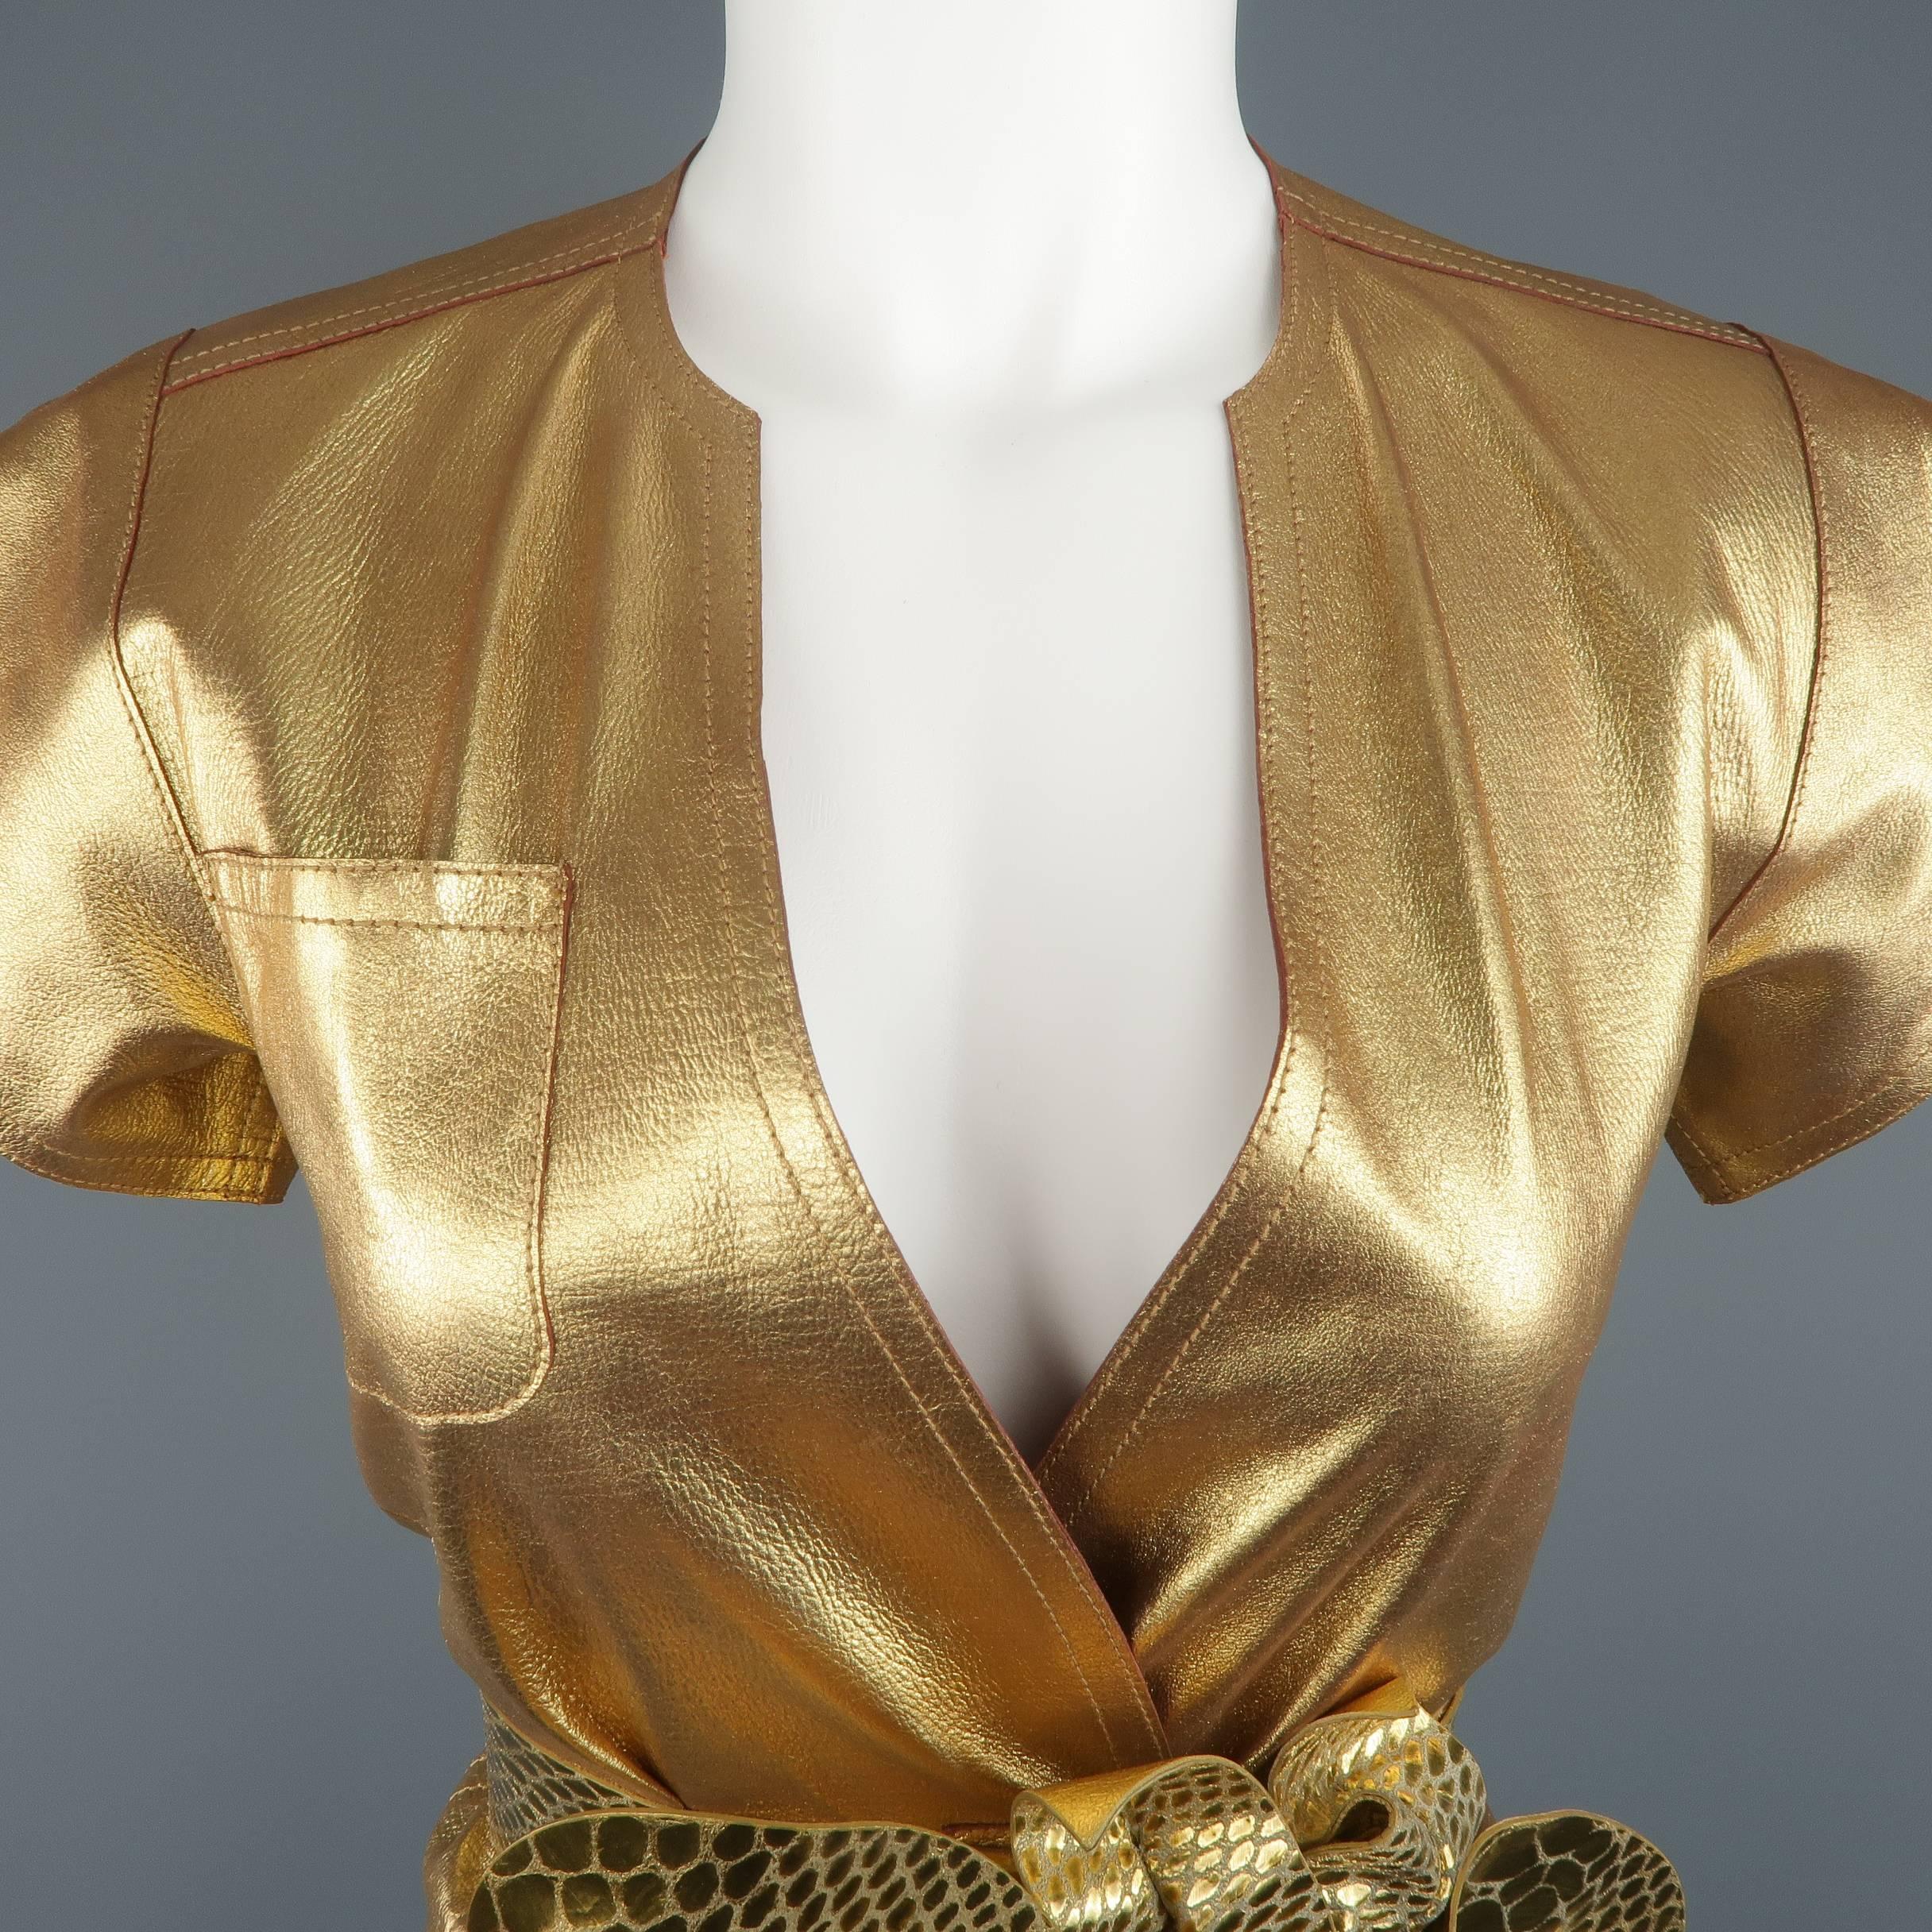 Marc Jacobs Spring 2011 runway top comes in metallic gold leather and features a deep V neck, wrap snap front, short sleeves, and crocodile textured waist belt with oversized flower. Made in USA.
 
Excellent Pre-Owned Condition.
Marked: 2
